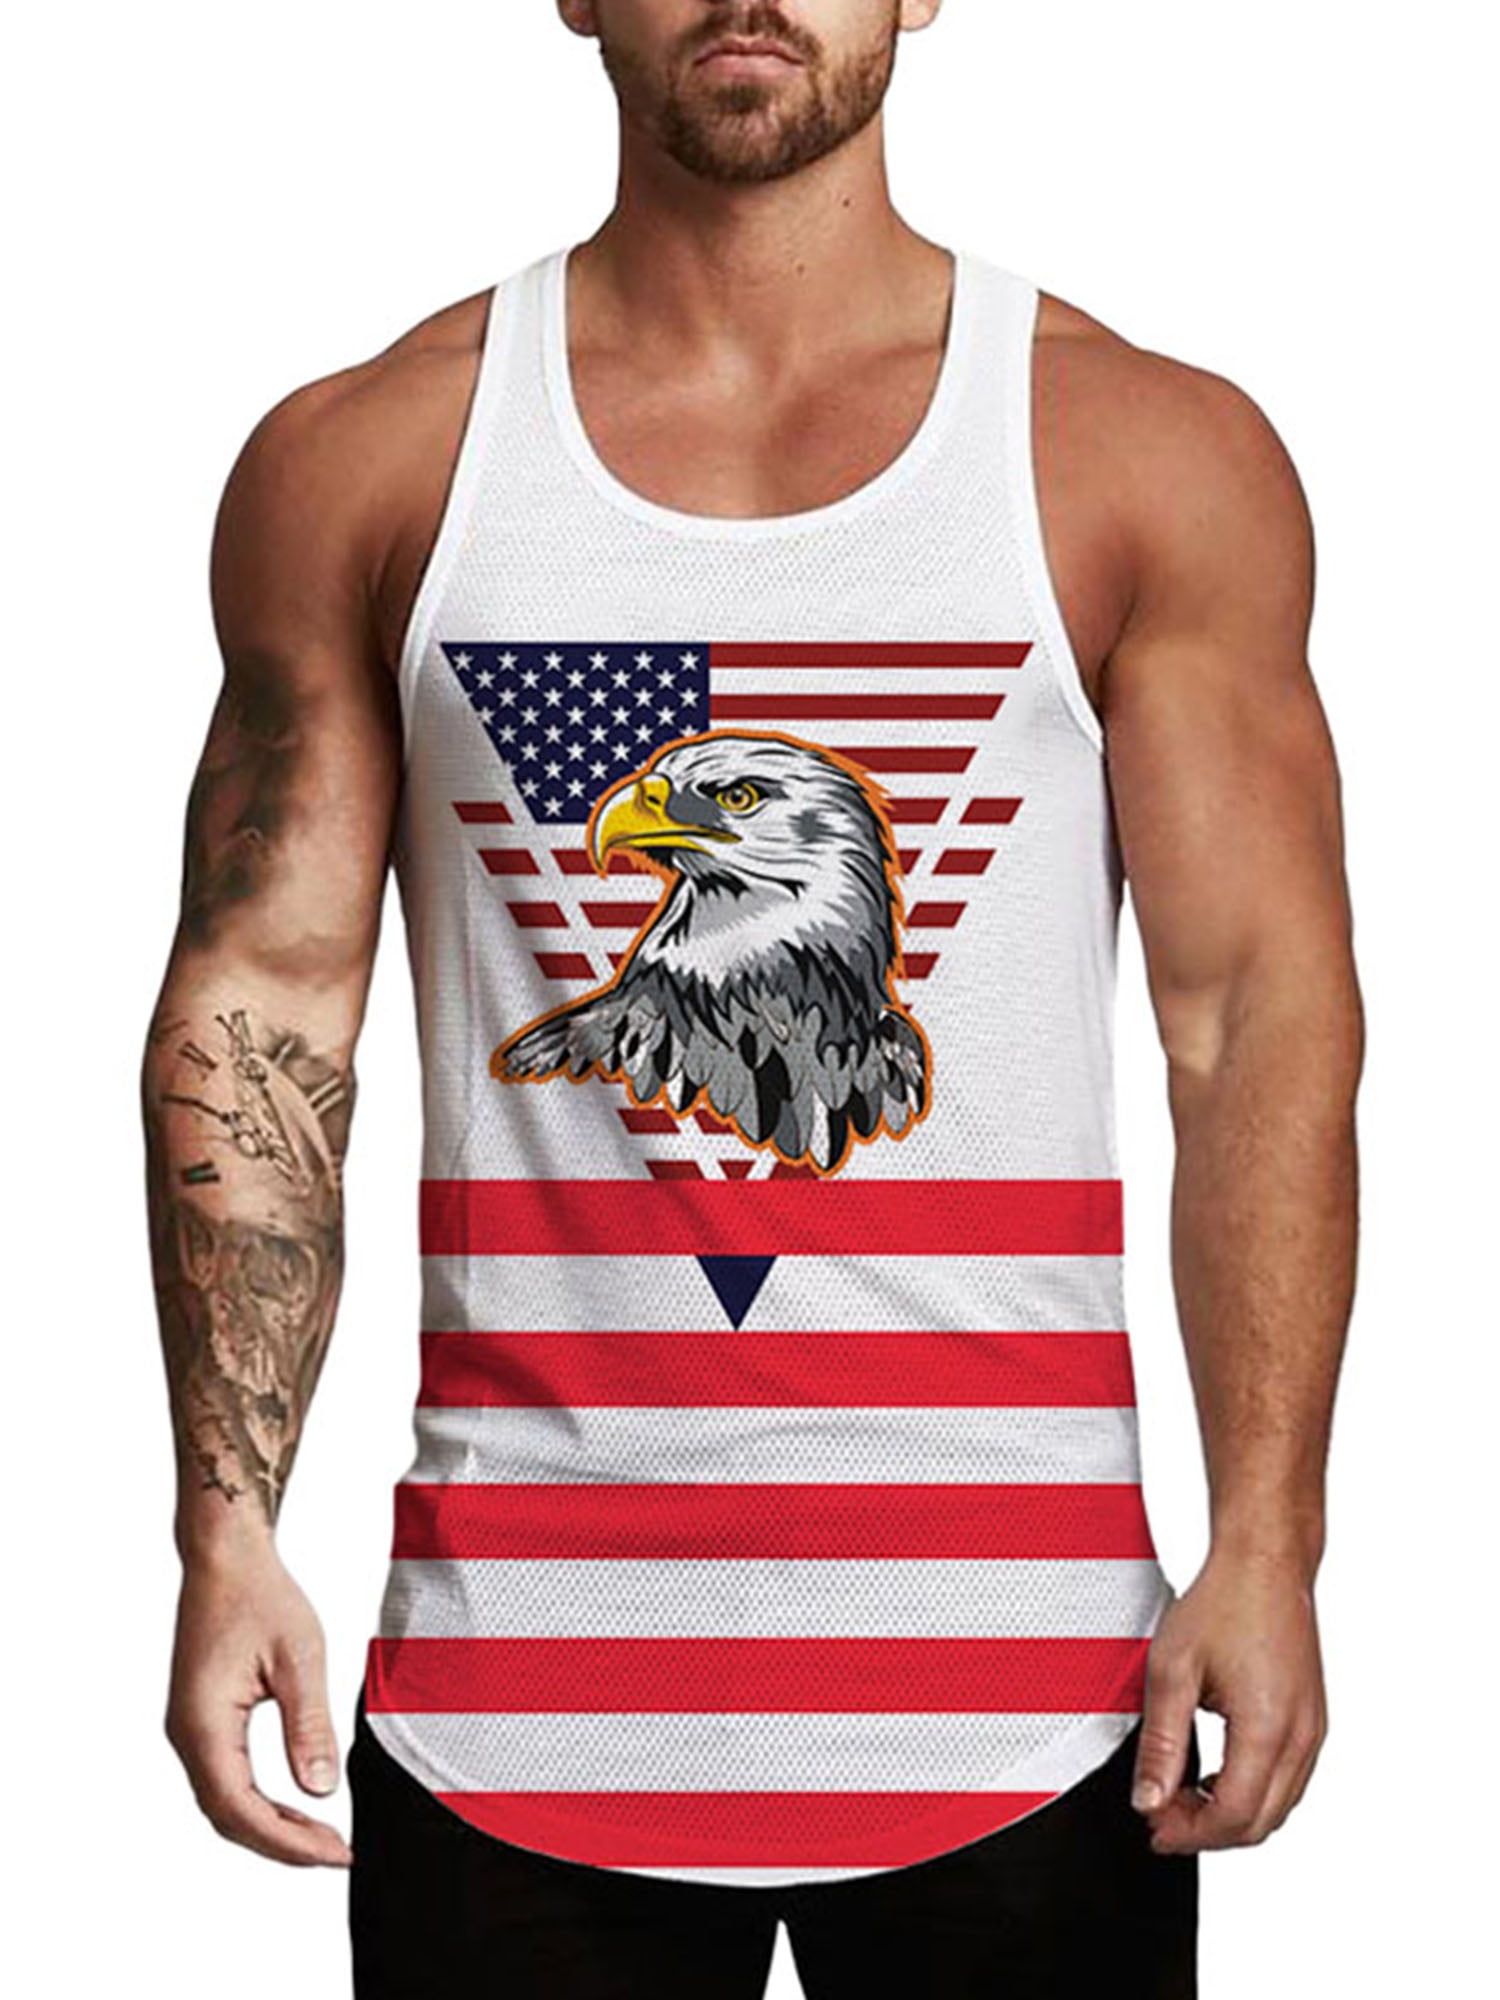 Mens Summer American Flag Patriotic Tank Top Casual Slim Fit Cool Muscle Sleeveless Tee Gym Workout Shirt 